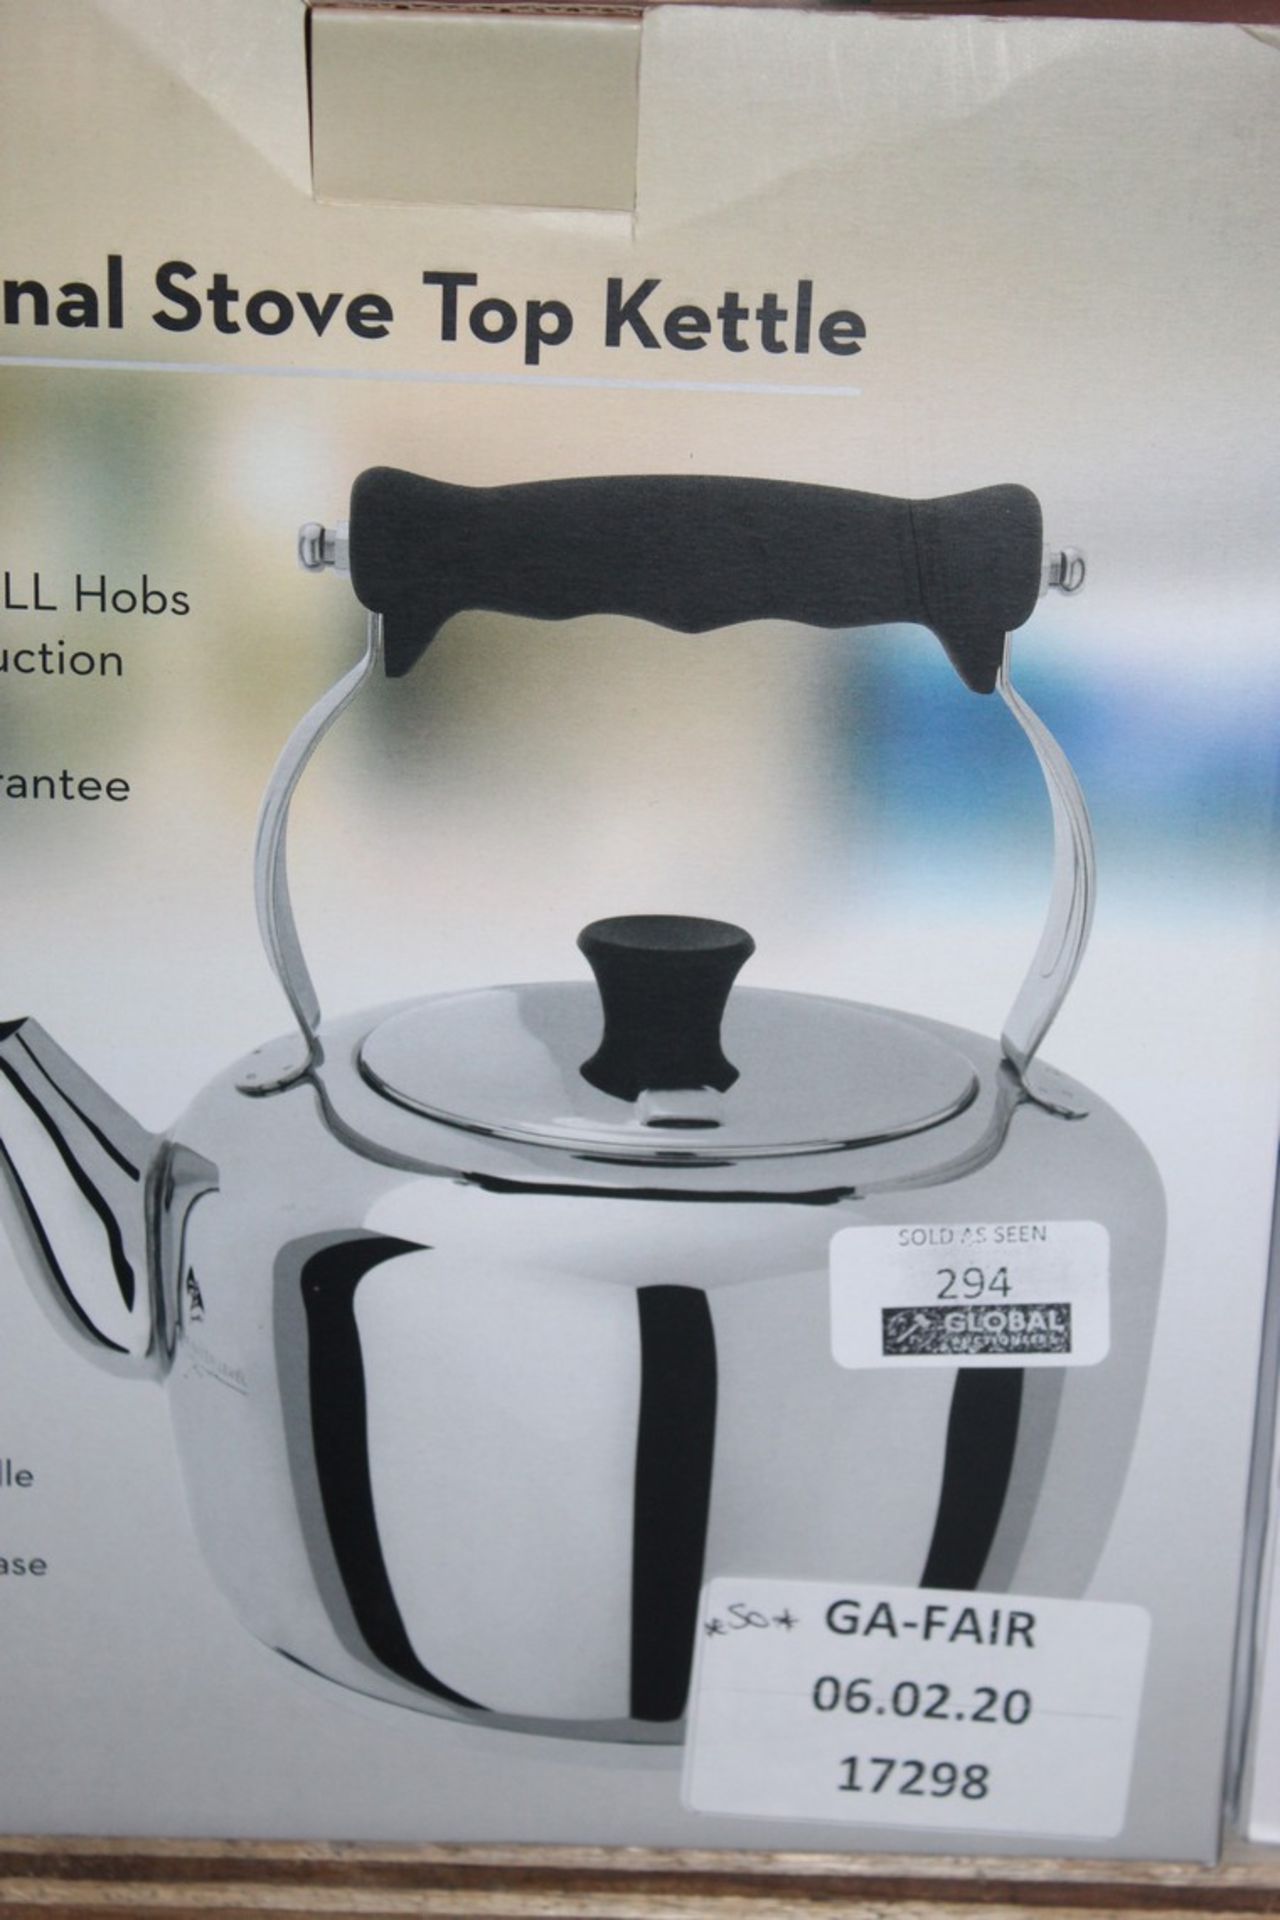 Boxed Stellar Traditional Stovetop, 2.6Ltr Kettle, RRP£50.00 (17298) (Public Viewing and